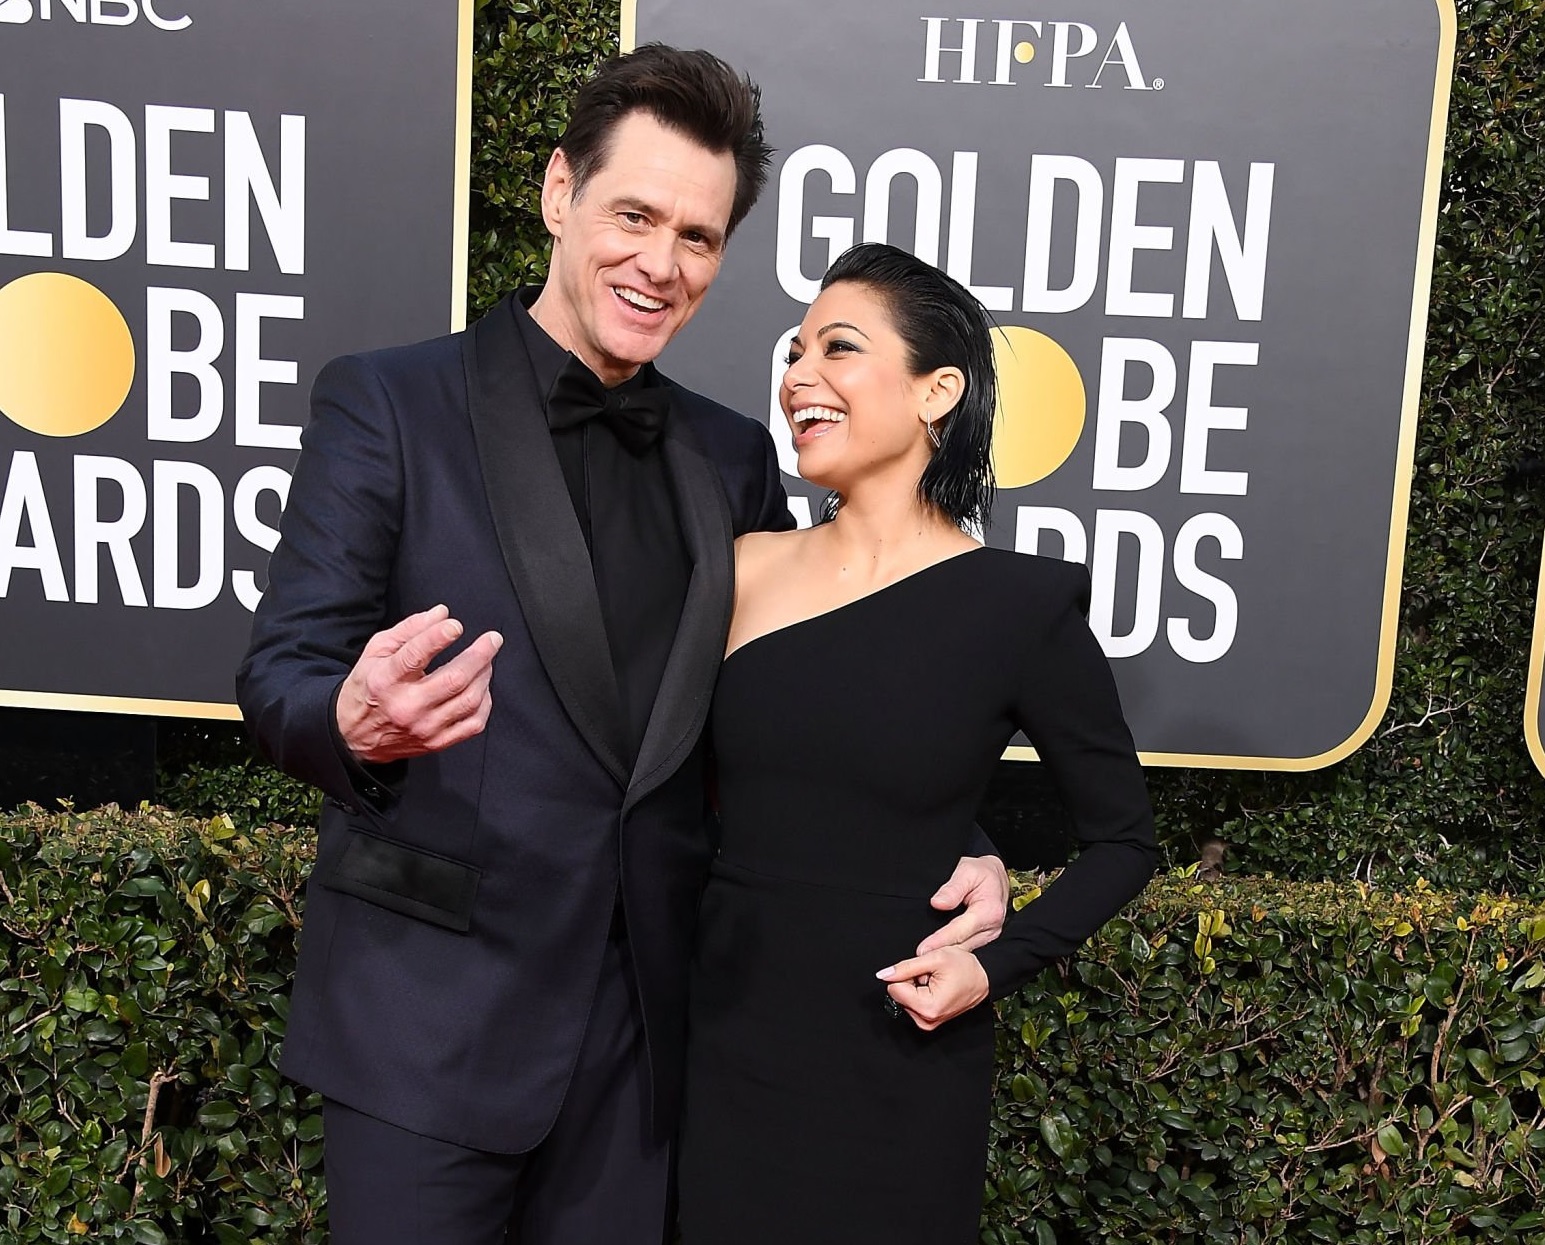 Ginger Gonzaga attended the Golden Glode Awards with her boyfriend at the time, Jim Carrey